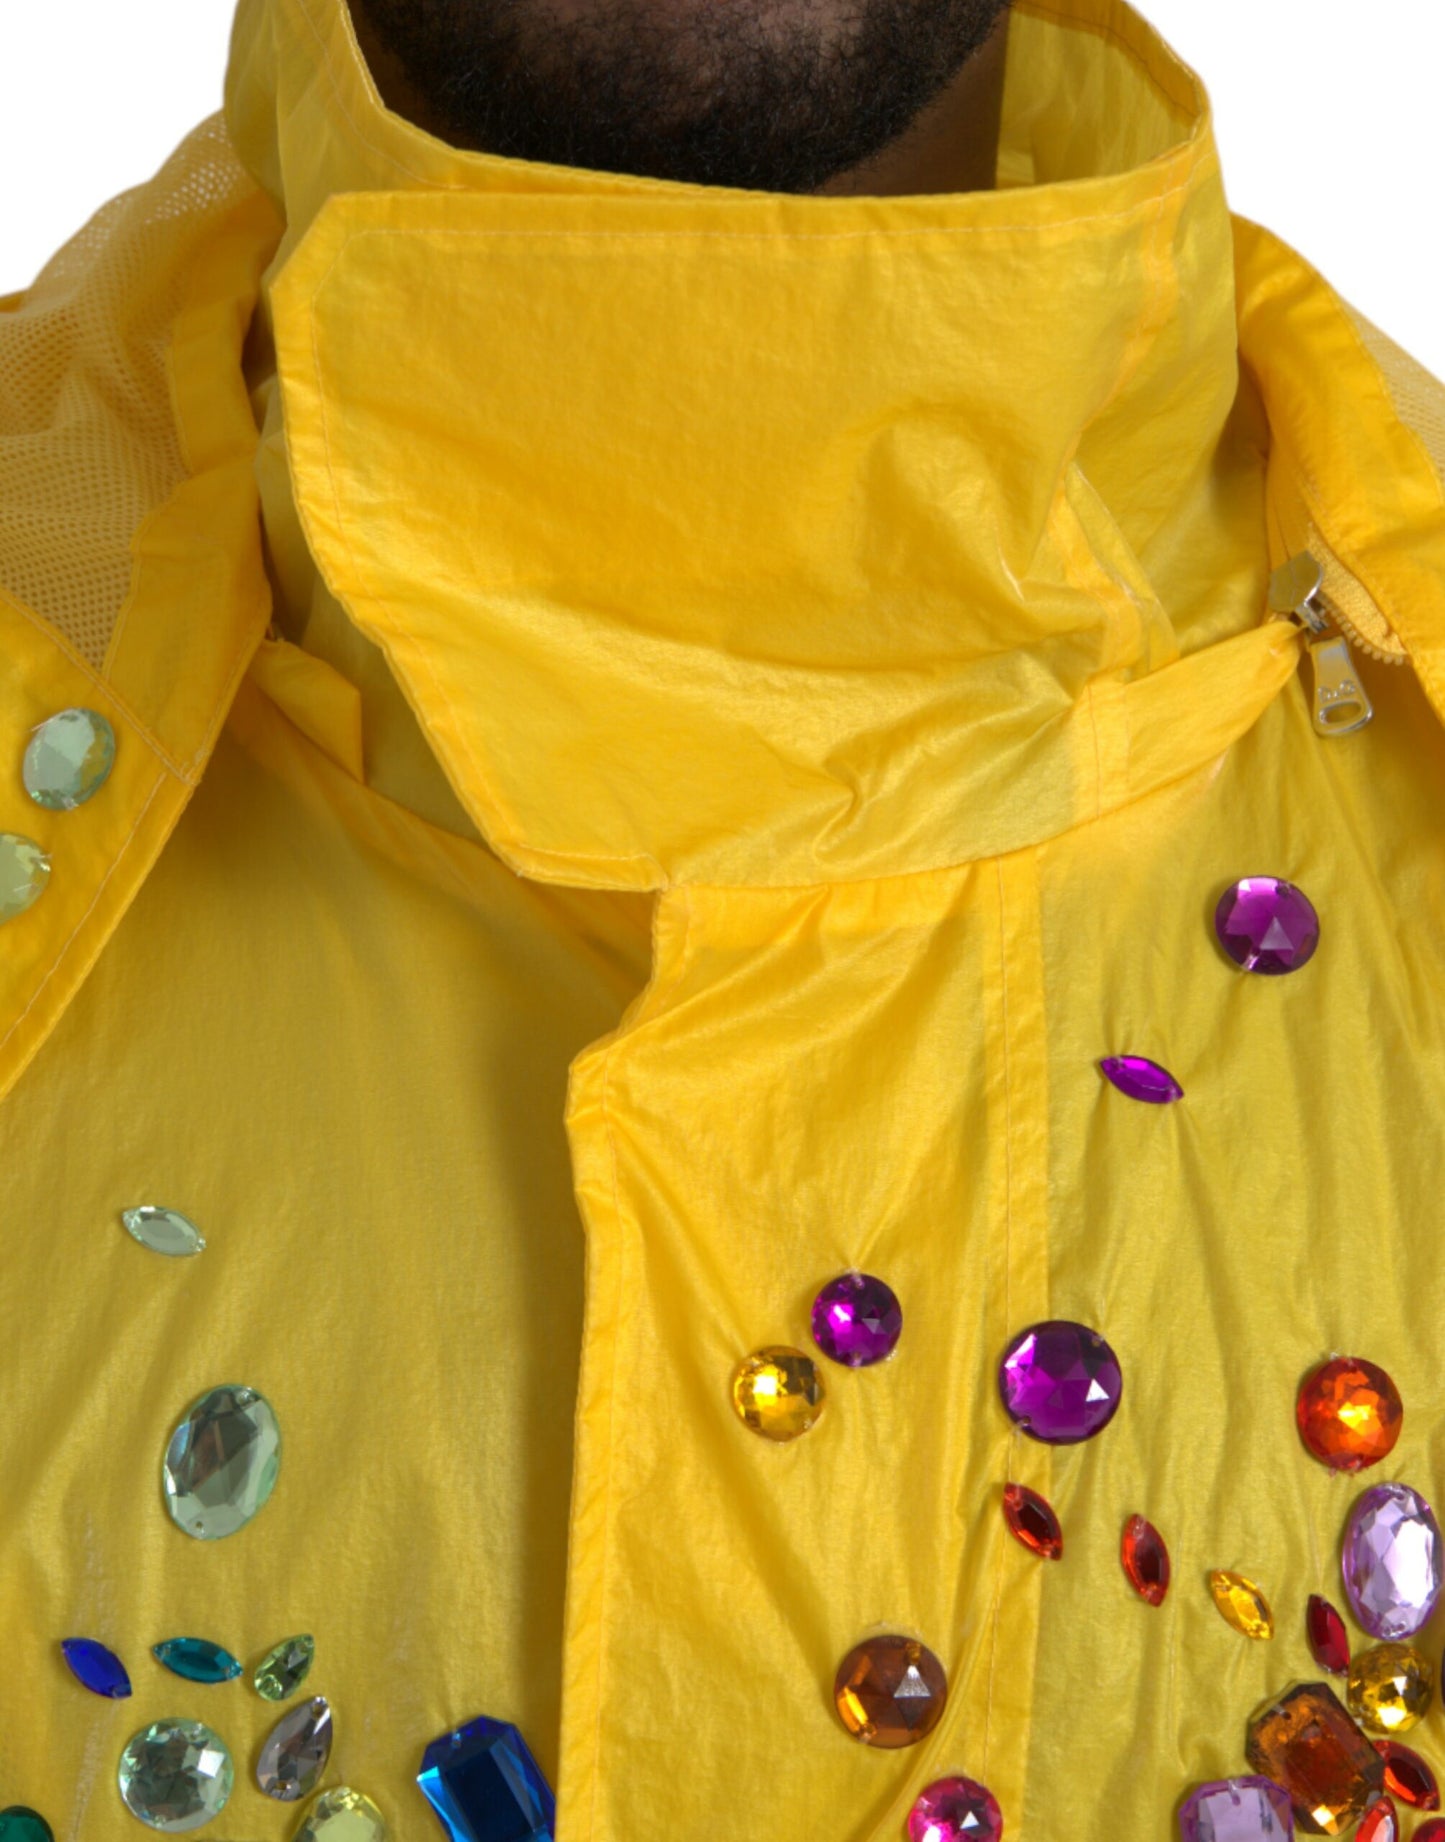 Dolce & Gabbana Yellow Crystal Embellished Hooded Jacket - Gio Beverly Hills